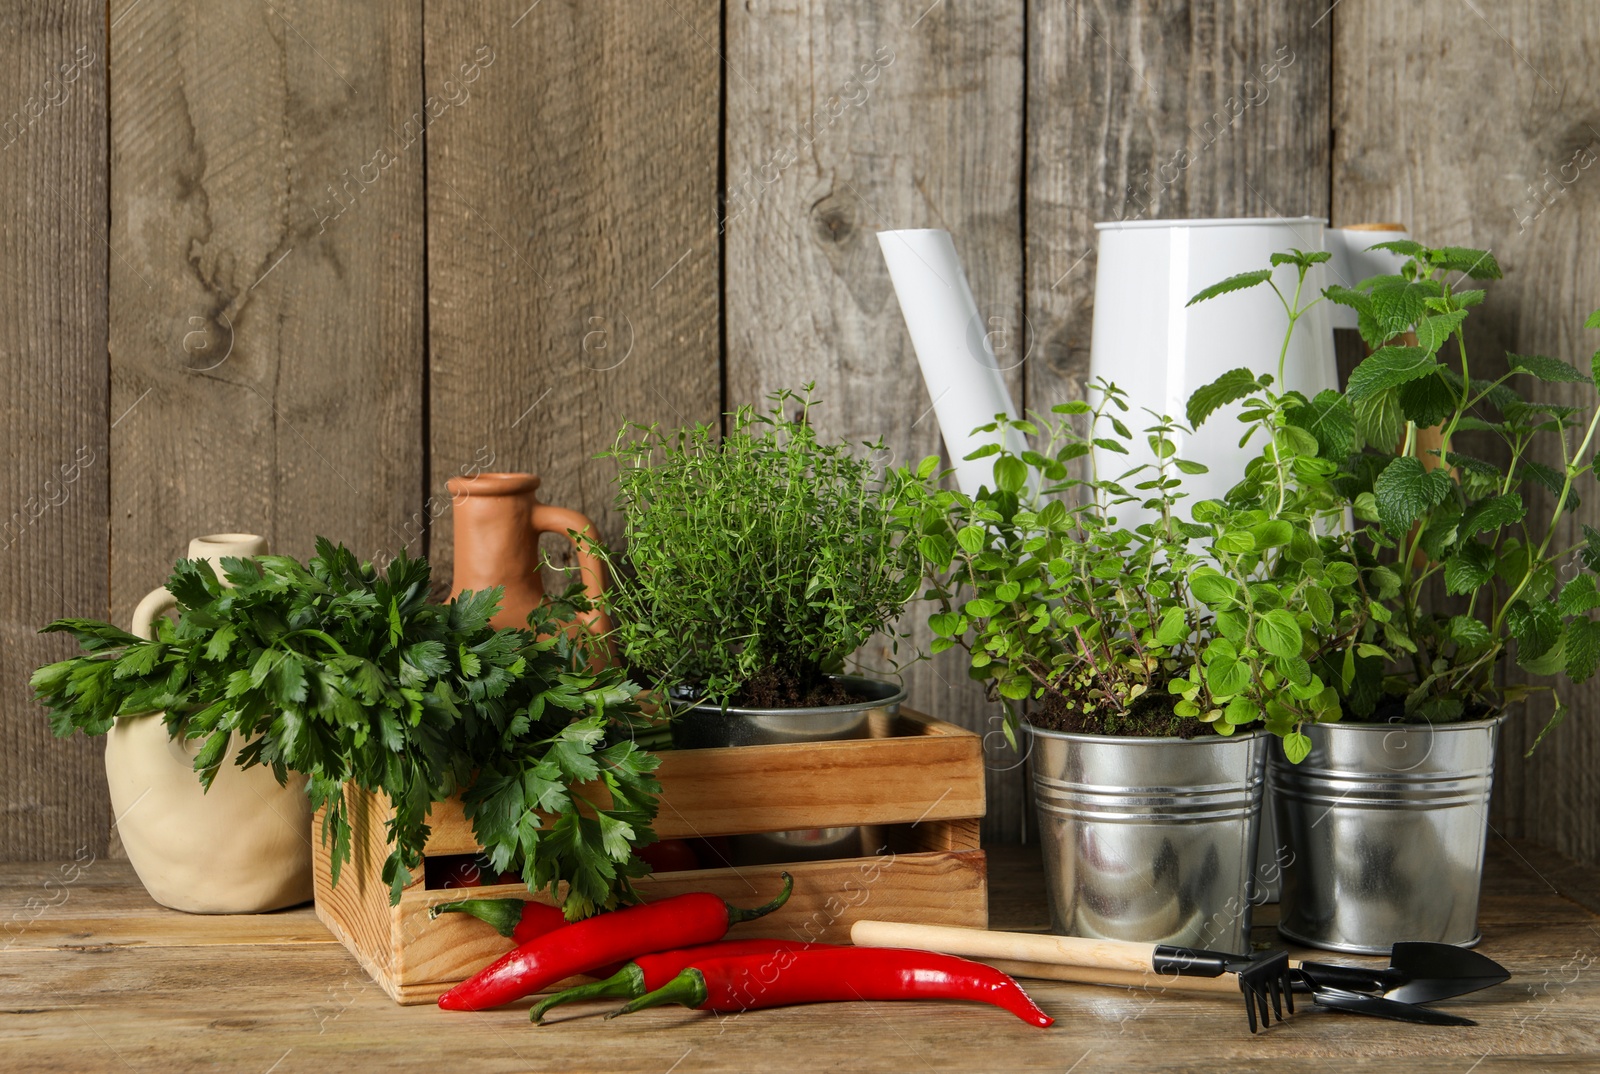 Photo of Different aromatic potted herbs, gardening tools and chili peppers on wooden table